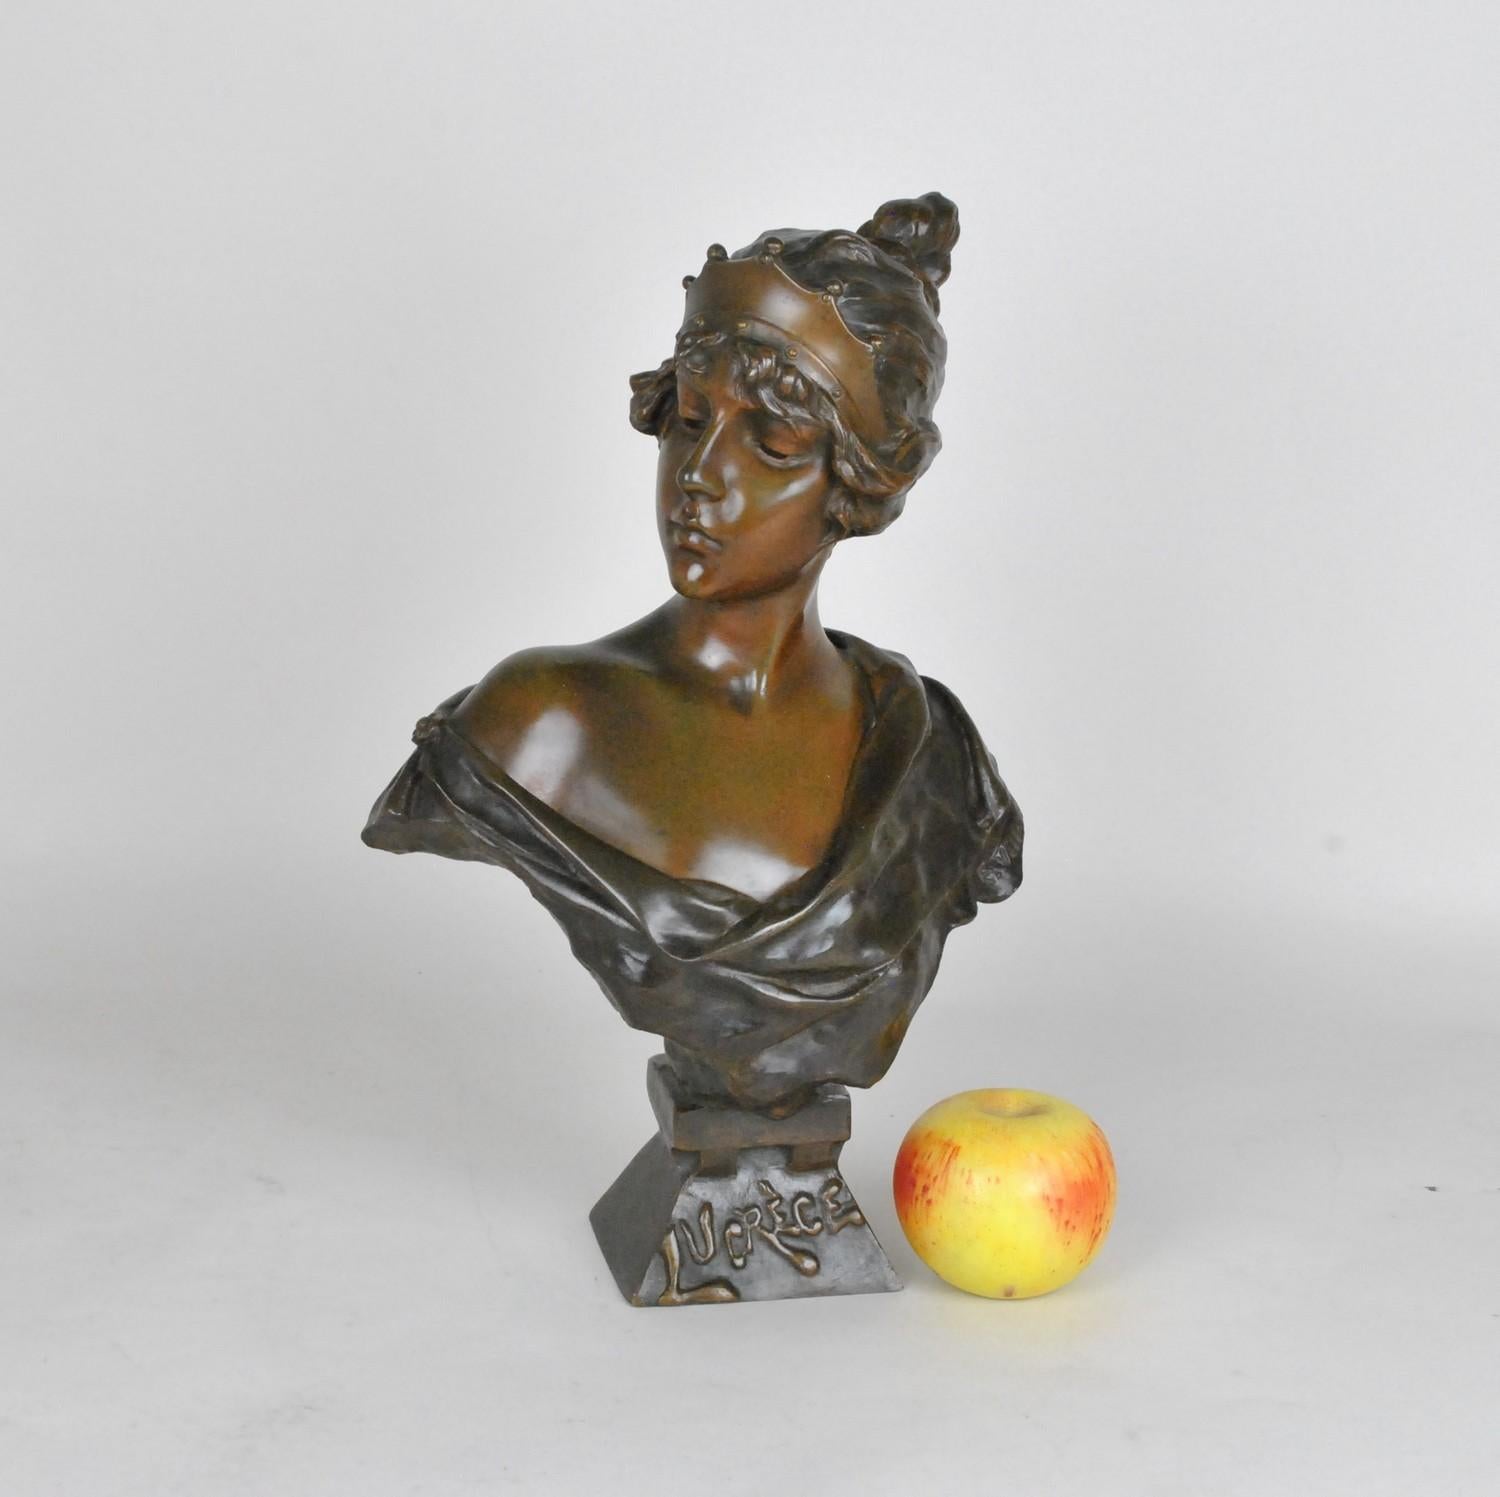 Bronze sculpture with brown patina titled on the front Lucrèce, and signed on the left shoulder E Villanis

Old edition of the Société des Bronzes de Paris from the beginning of the 20th century, numbered 5506.

Slight wear of time on the